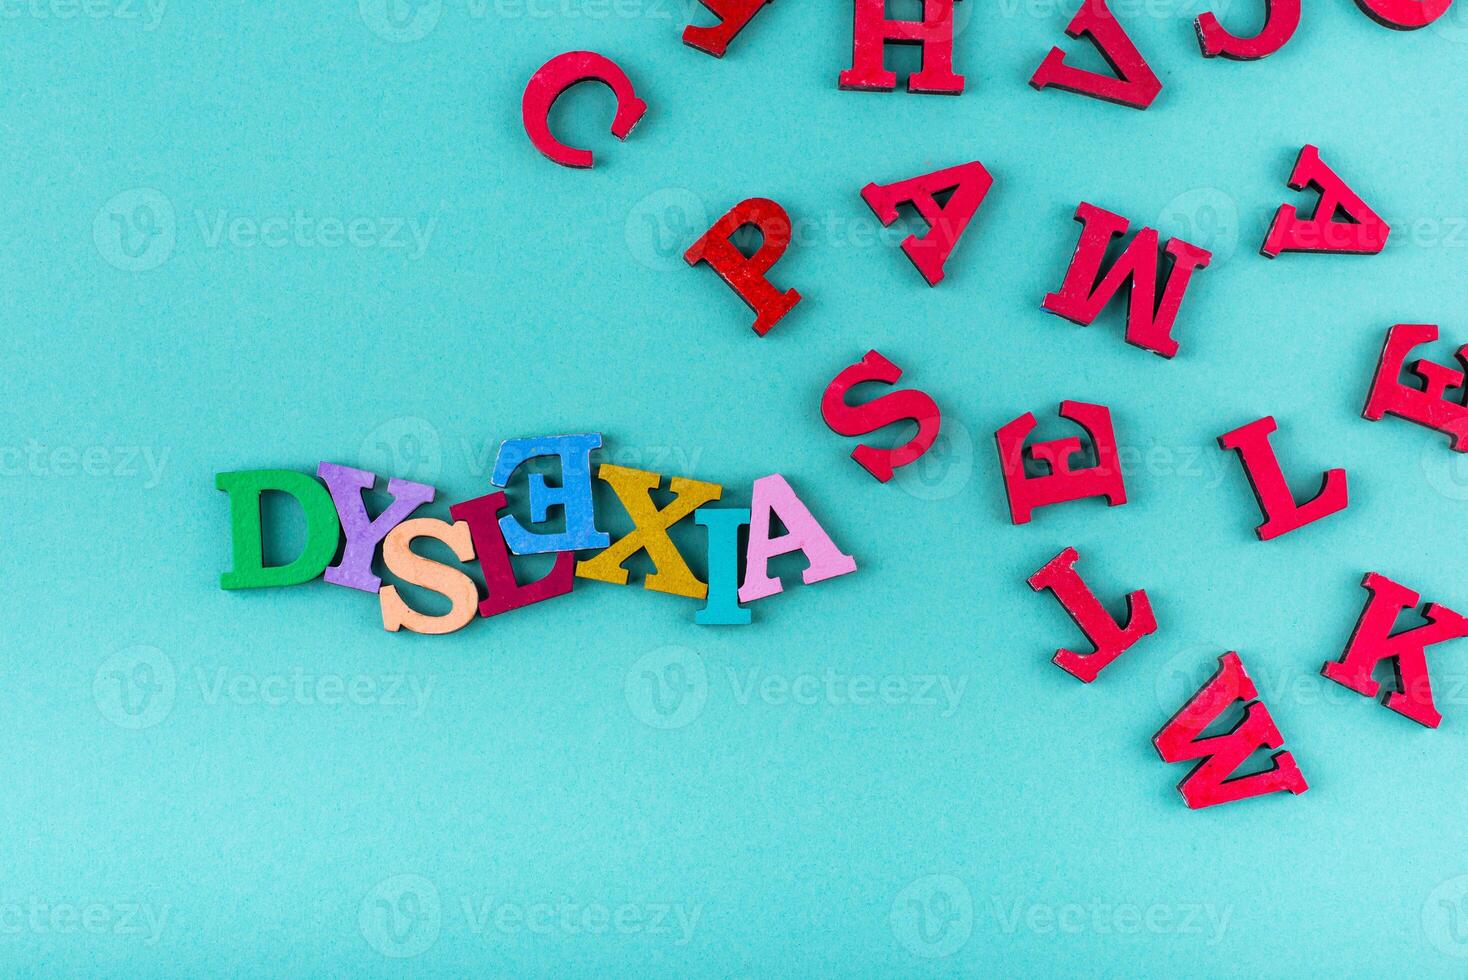 Dyslexia awareness concept with letters photo